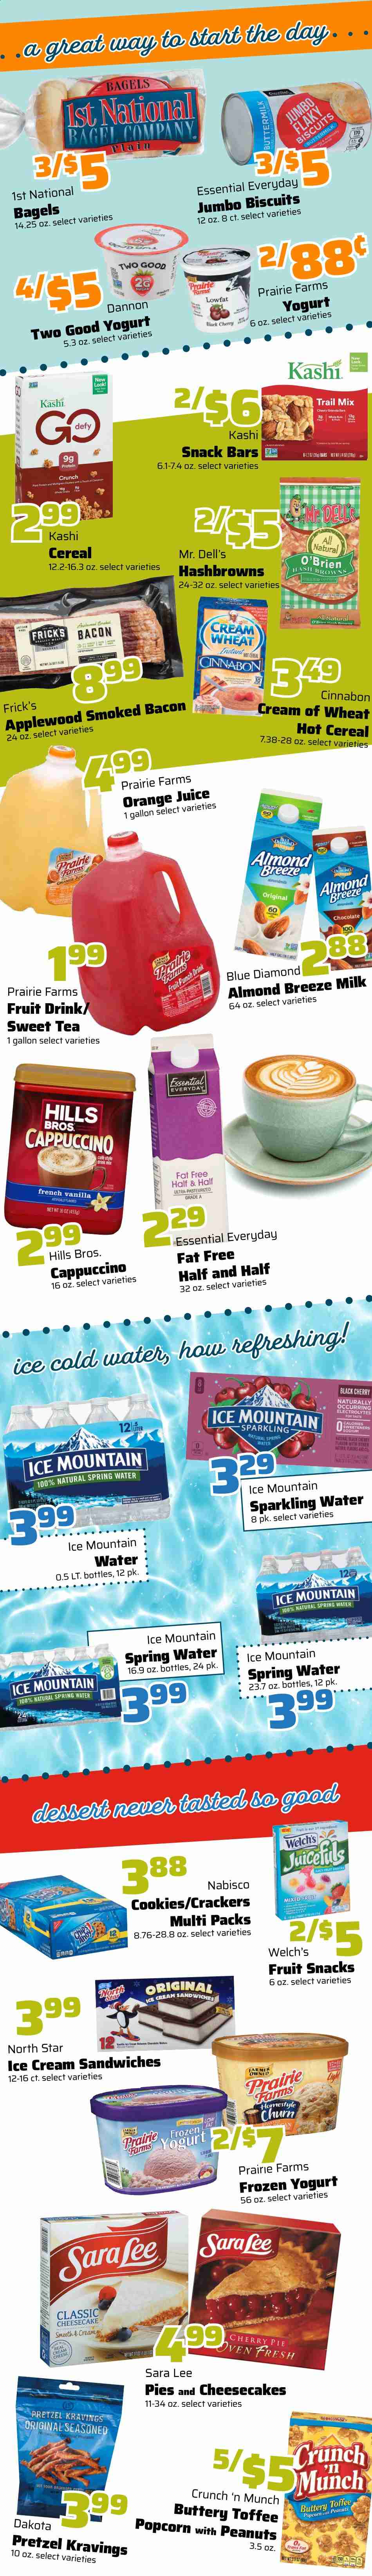 thumbnail - County Market Flyer - 03/10/2021 - 03/16/2021 - Sales products - Sara Lee, pretzels, bagels, cheesecake, pie, cream cheese, hash browns, Welch's, bacon, cheese, Almond Breeze, yoghurt, Dannon, buttermilk, almond milk, ice cream sandwich, ice cream, crackers, toffee, fruit snack, snack bar, biscuit, chocolate, cookies, popcorn, sugar, Cream of Wheat, granola bar, cereals, Blue Diamond, fruit drink, orange juice, juice, spring water, Ice Mountain, sparkling water, tea, cappuccino. Page 1.